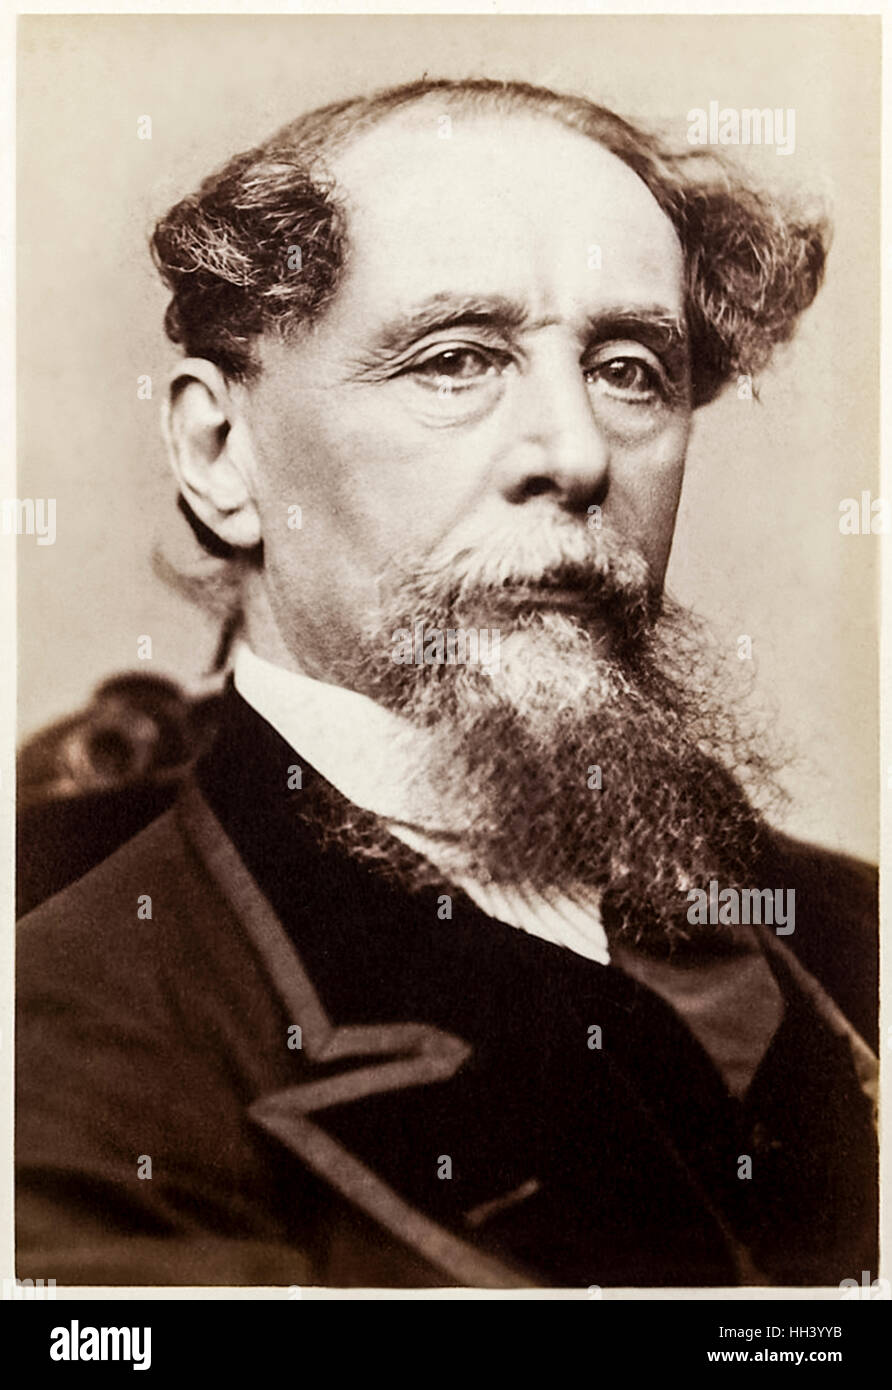 Charles Dickens (1812-1870) English writer and popular Victorian novelist who's success started with the serial publication of 'The Posthumous Papers of the Pickwick Club' published under the pseudonym Boz. See description for more information. Stock Photo